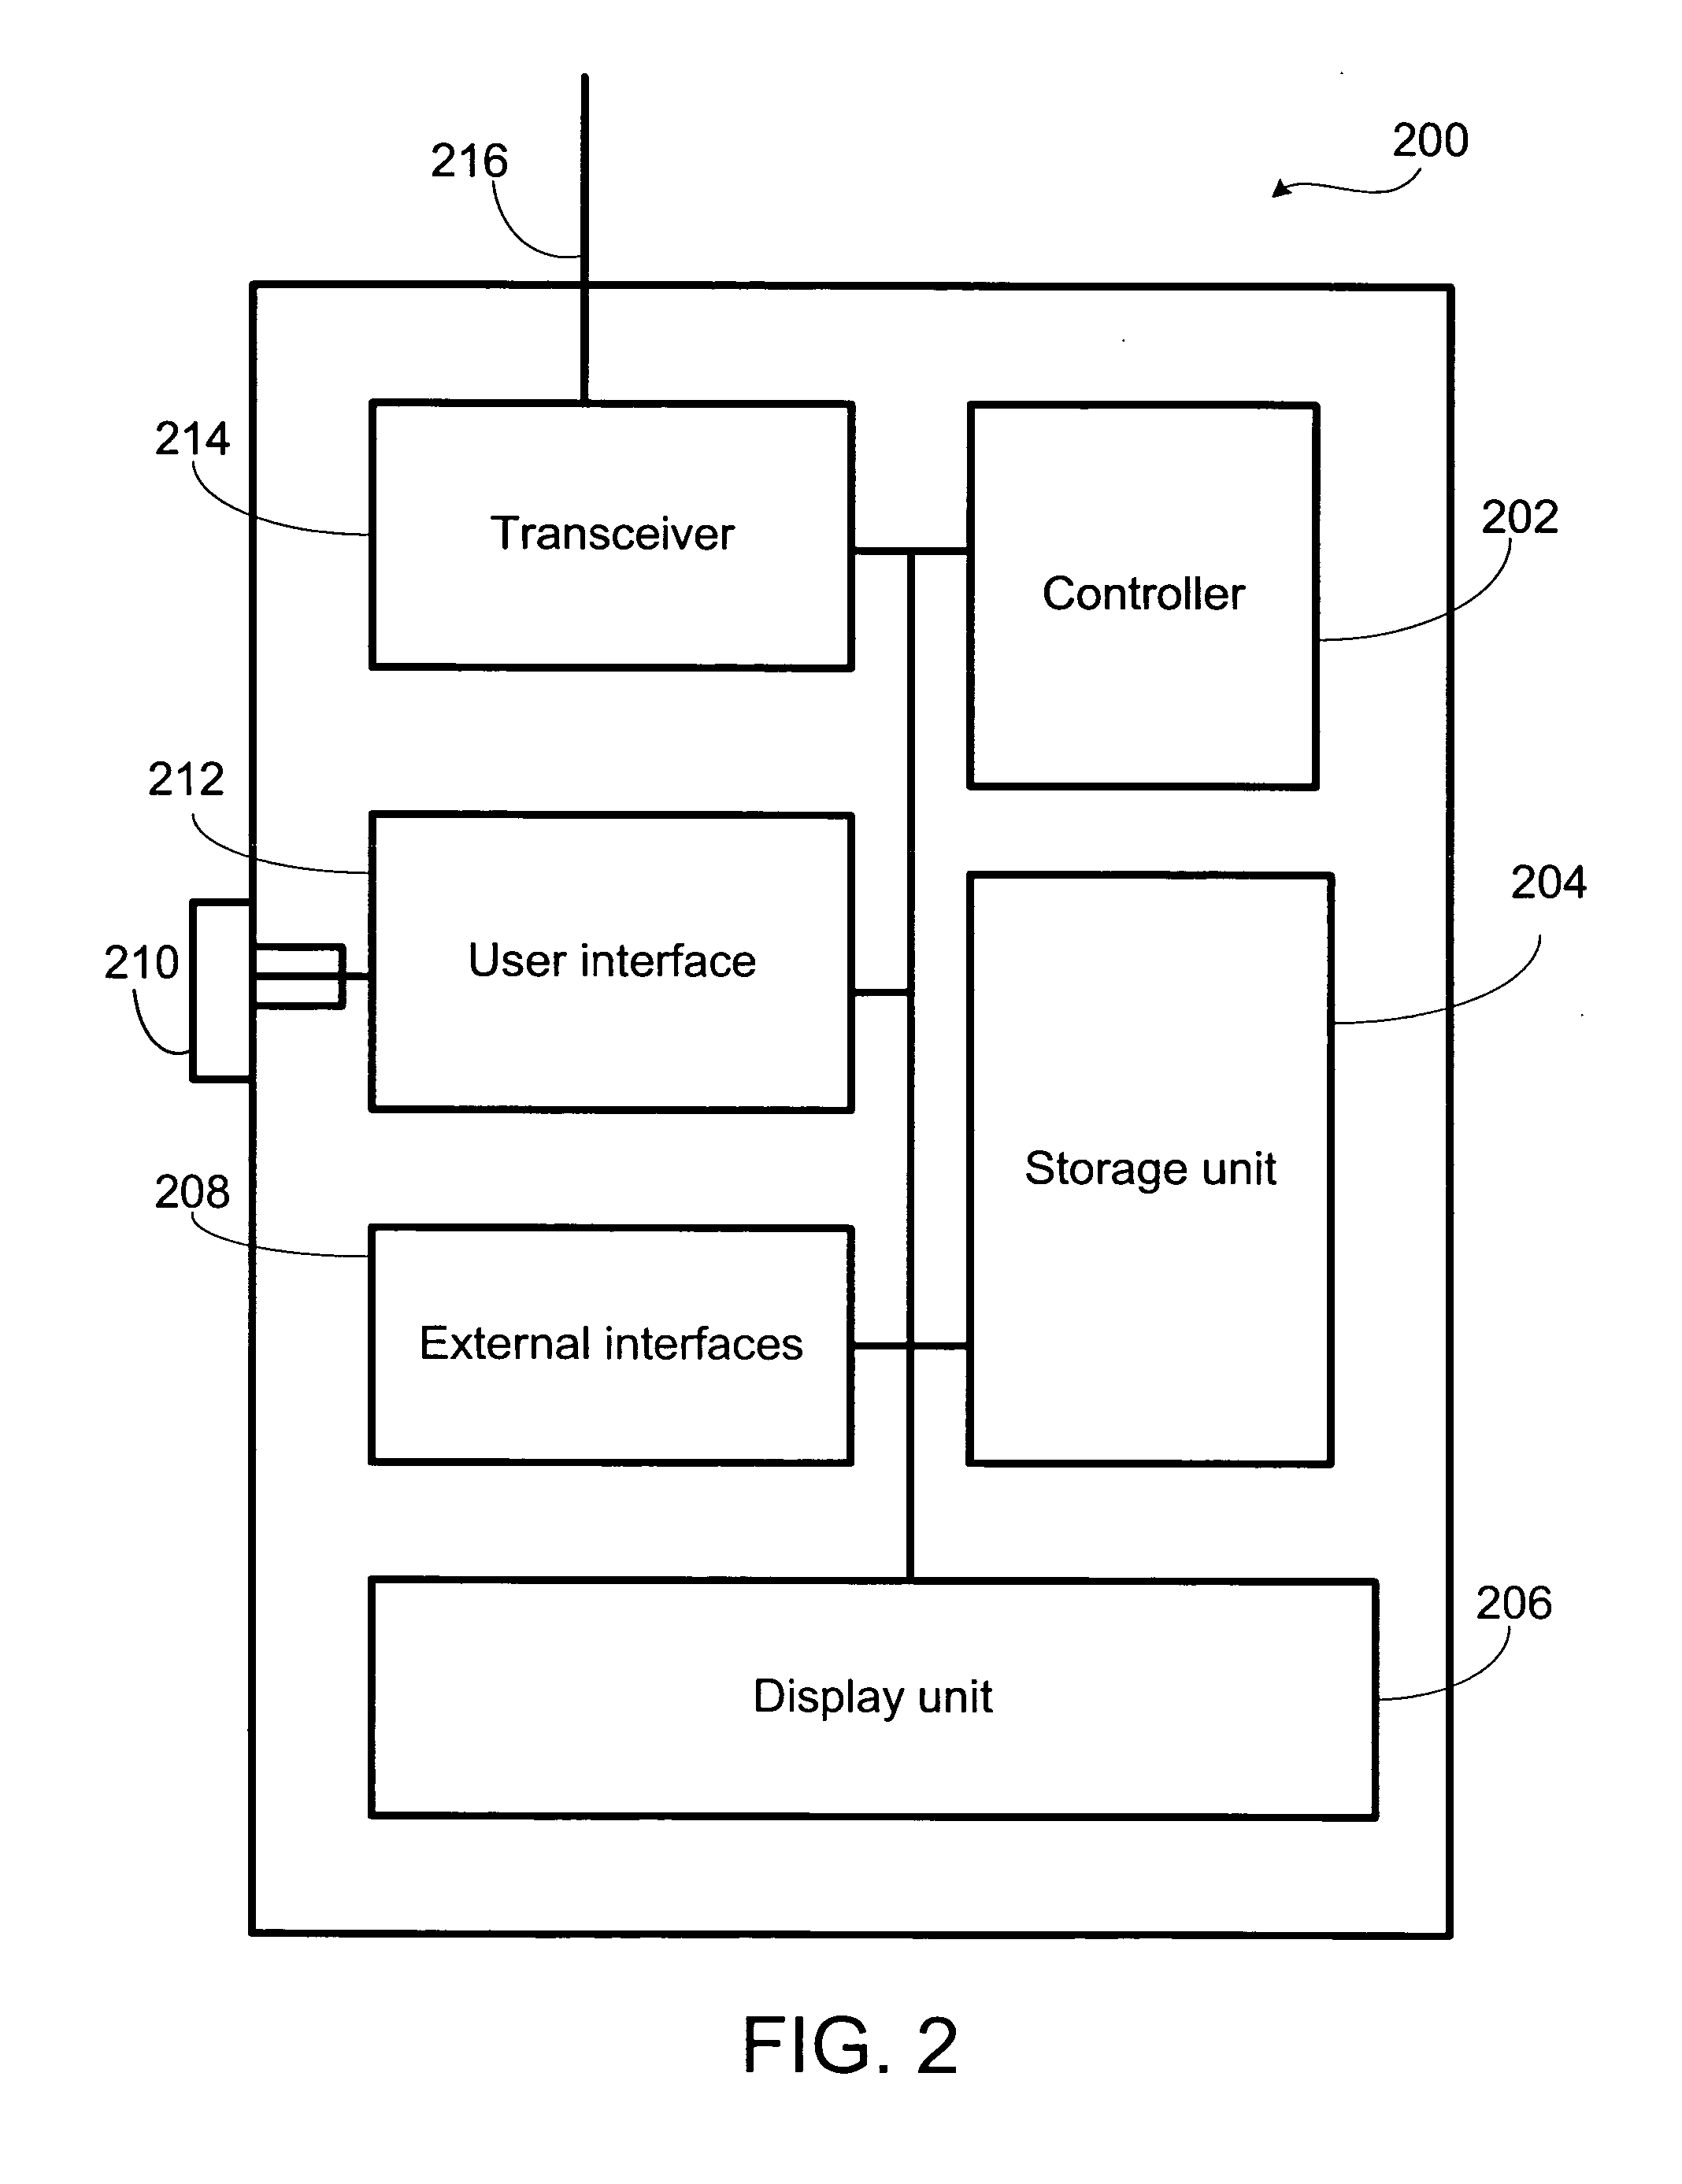 System and method for transmitting and playing alert tones in a push-to-talk system